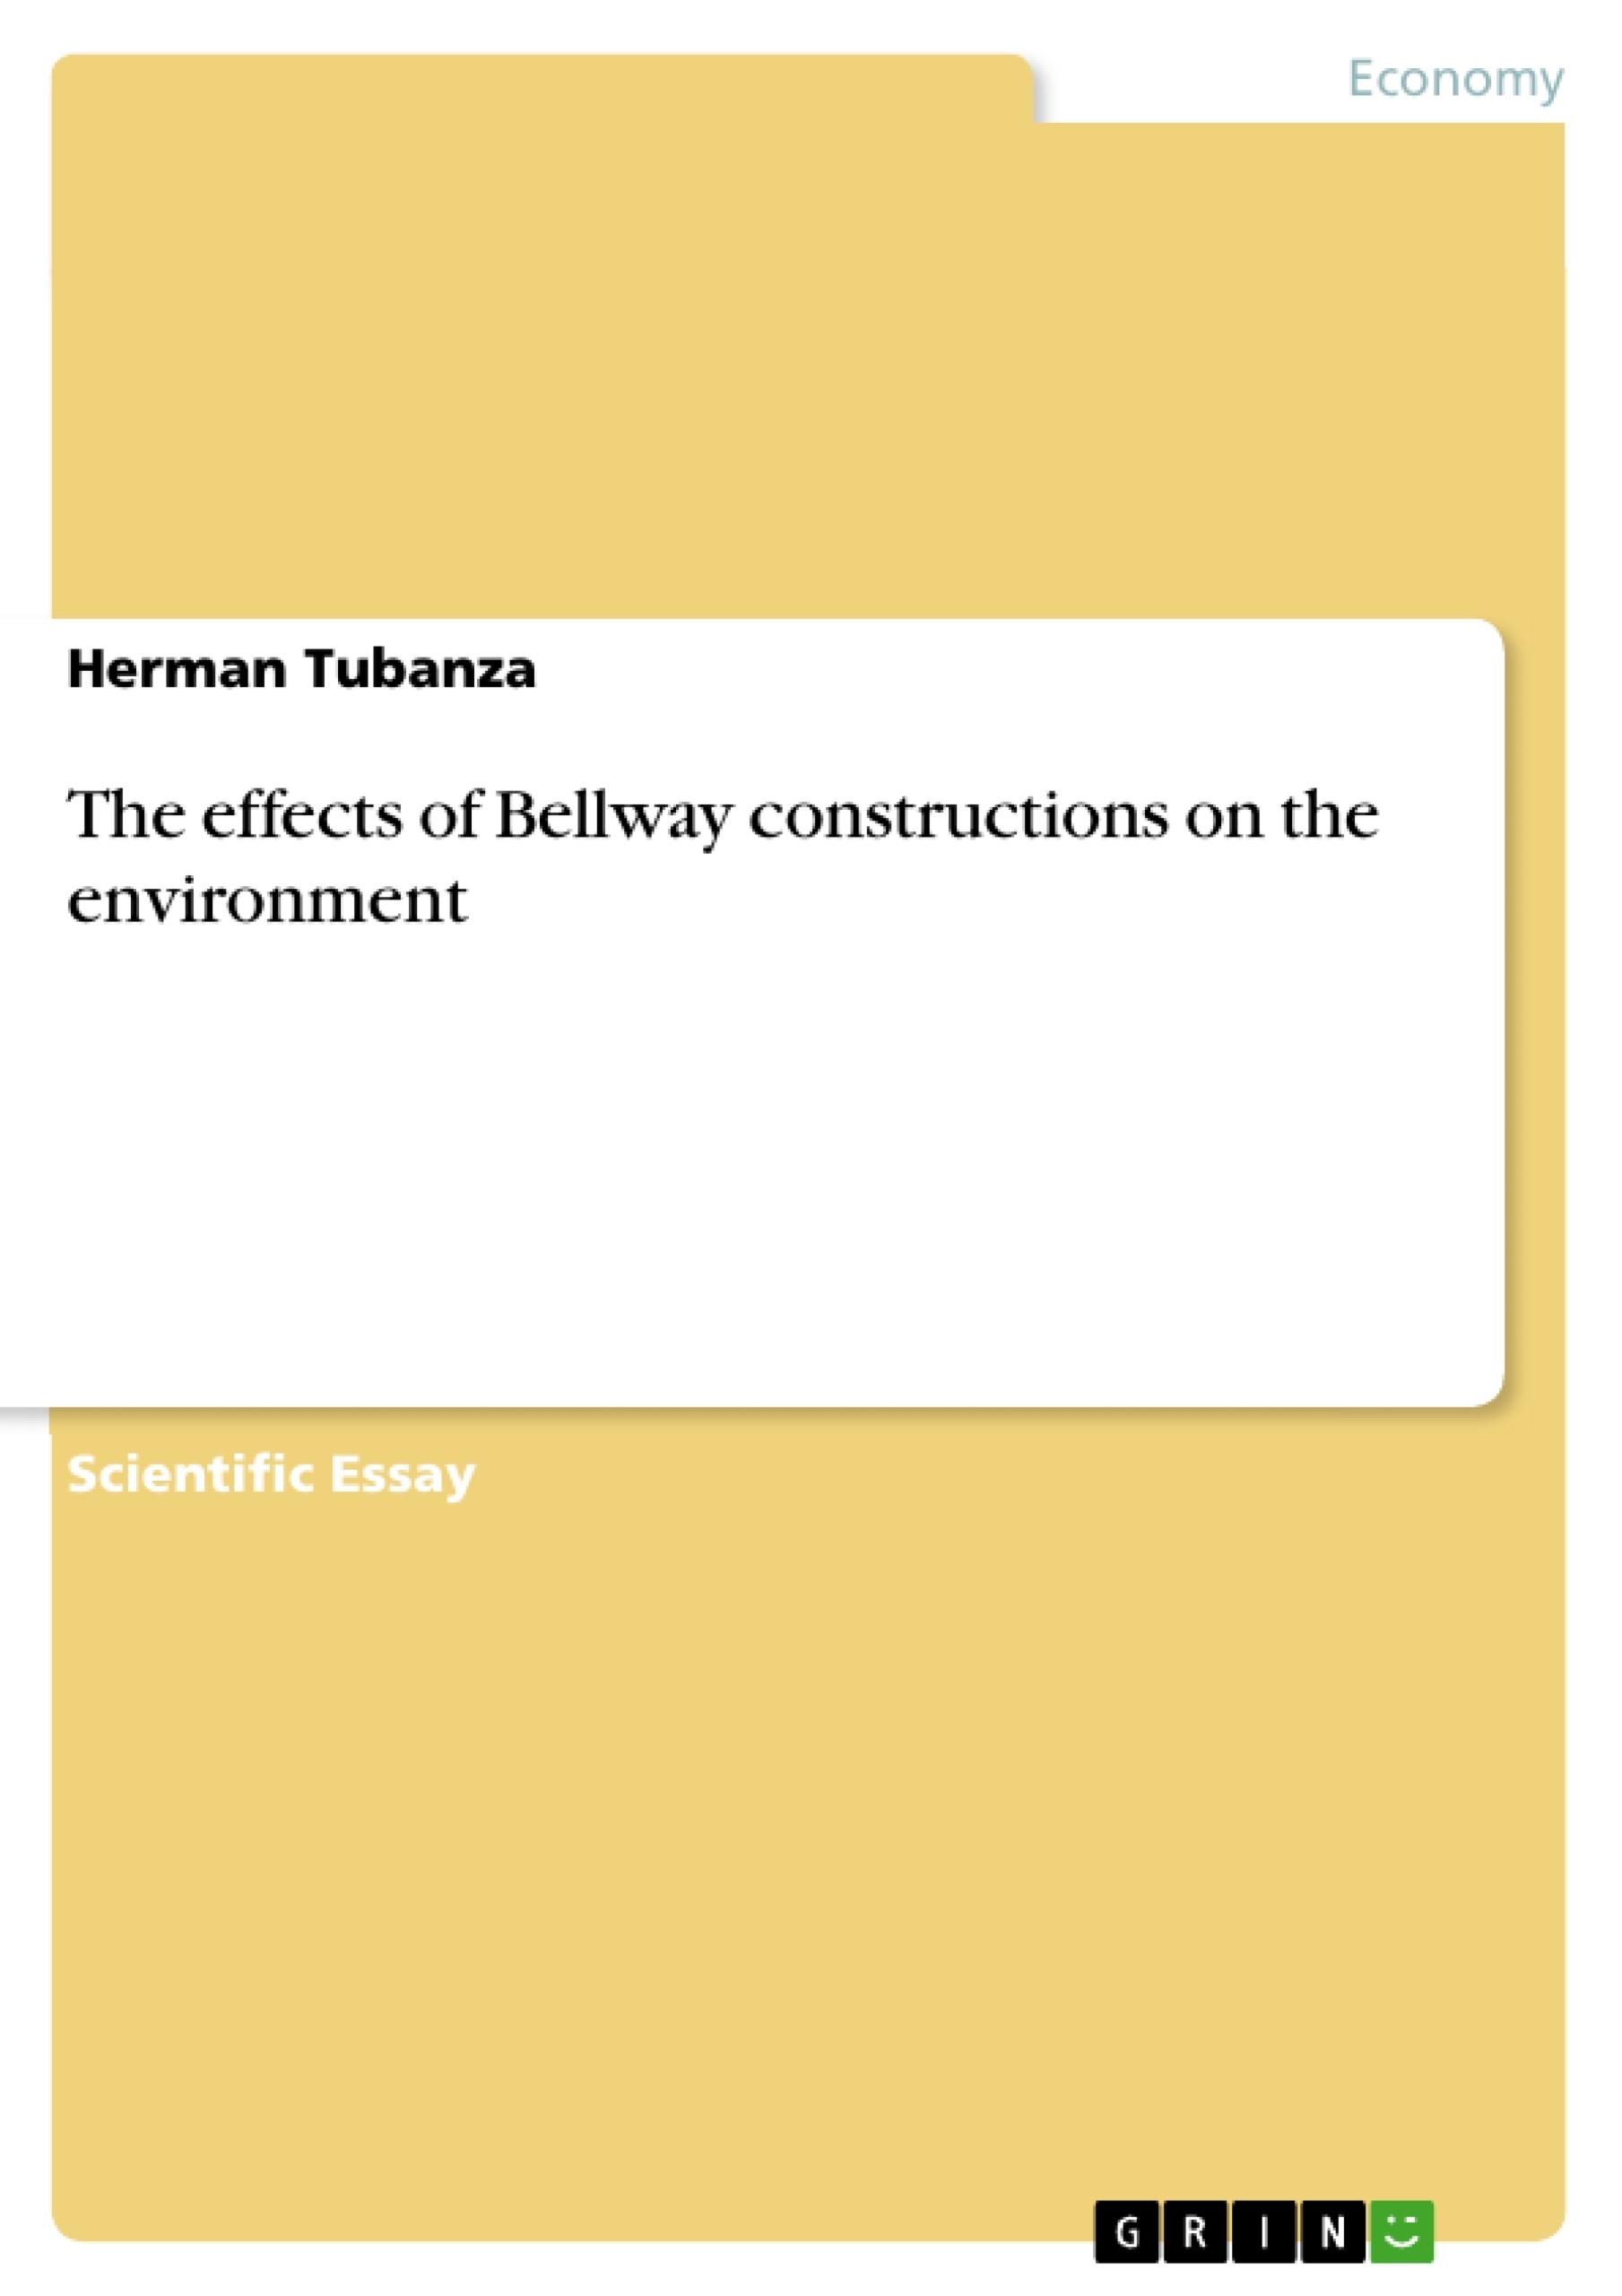 Title: The effects of Bellway constructions on the environment